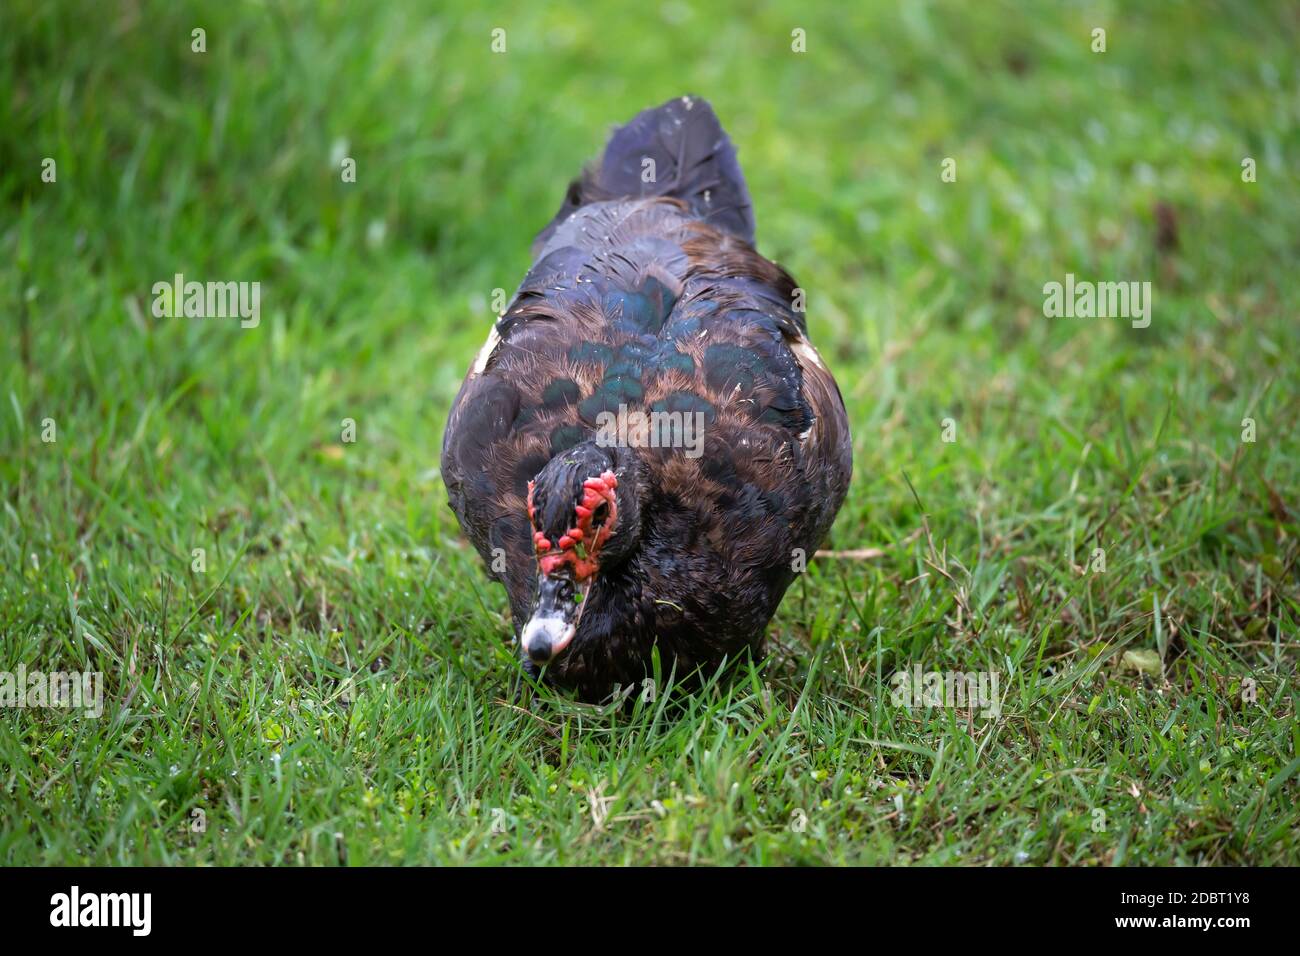 One black duck with a red head in Madagascar Stock Photo